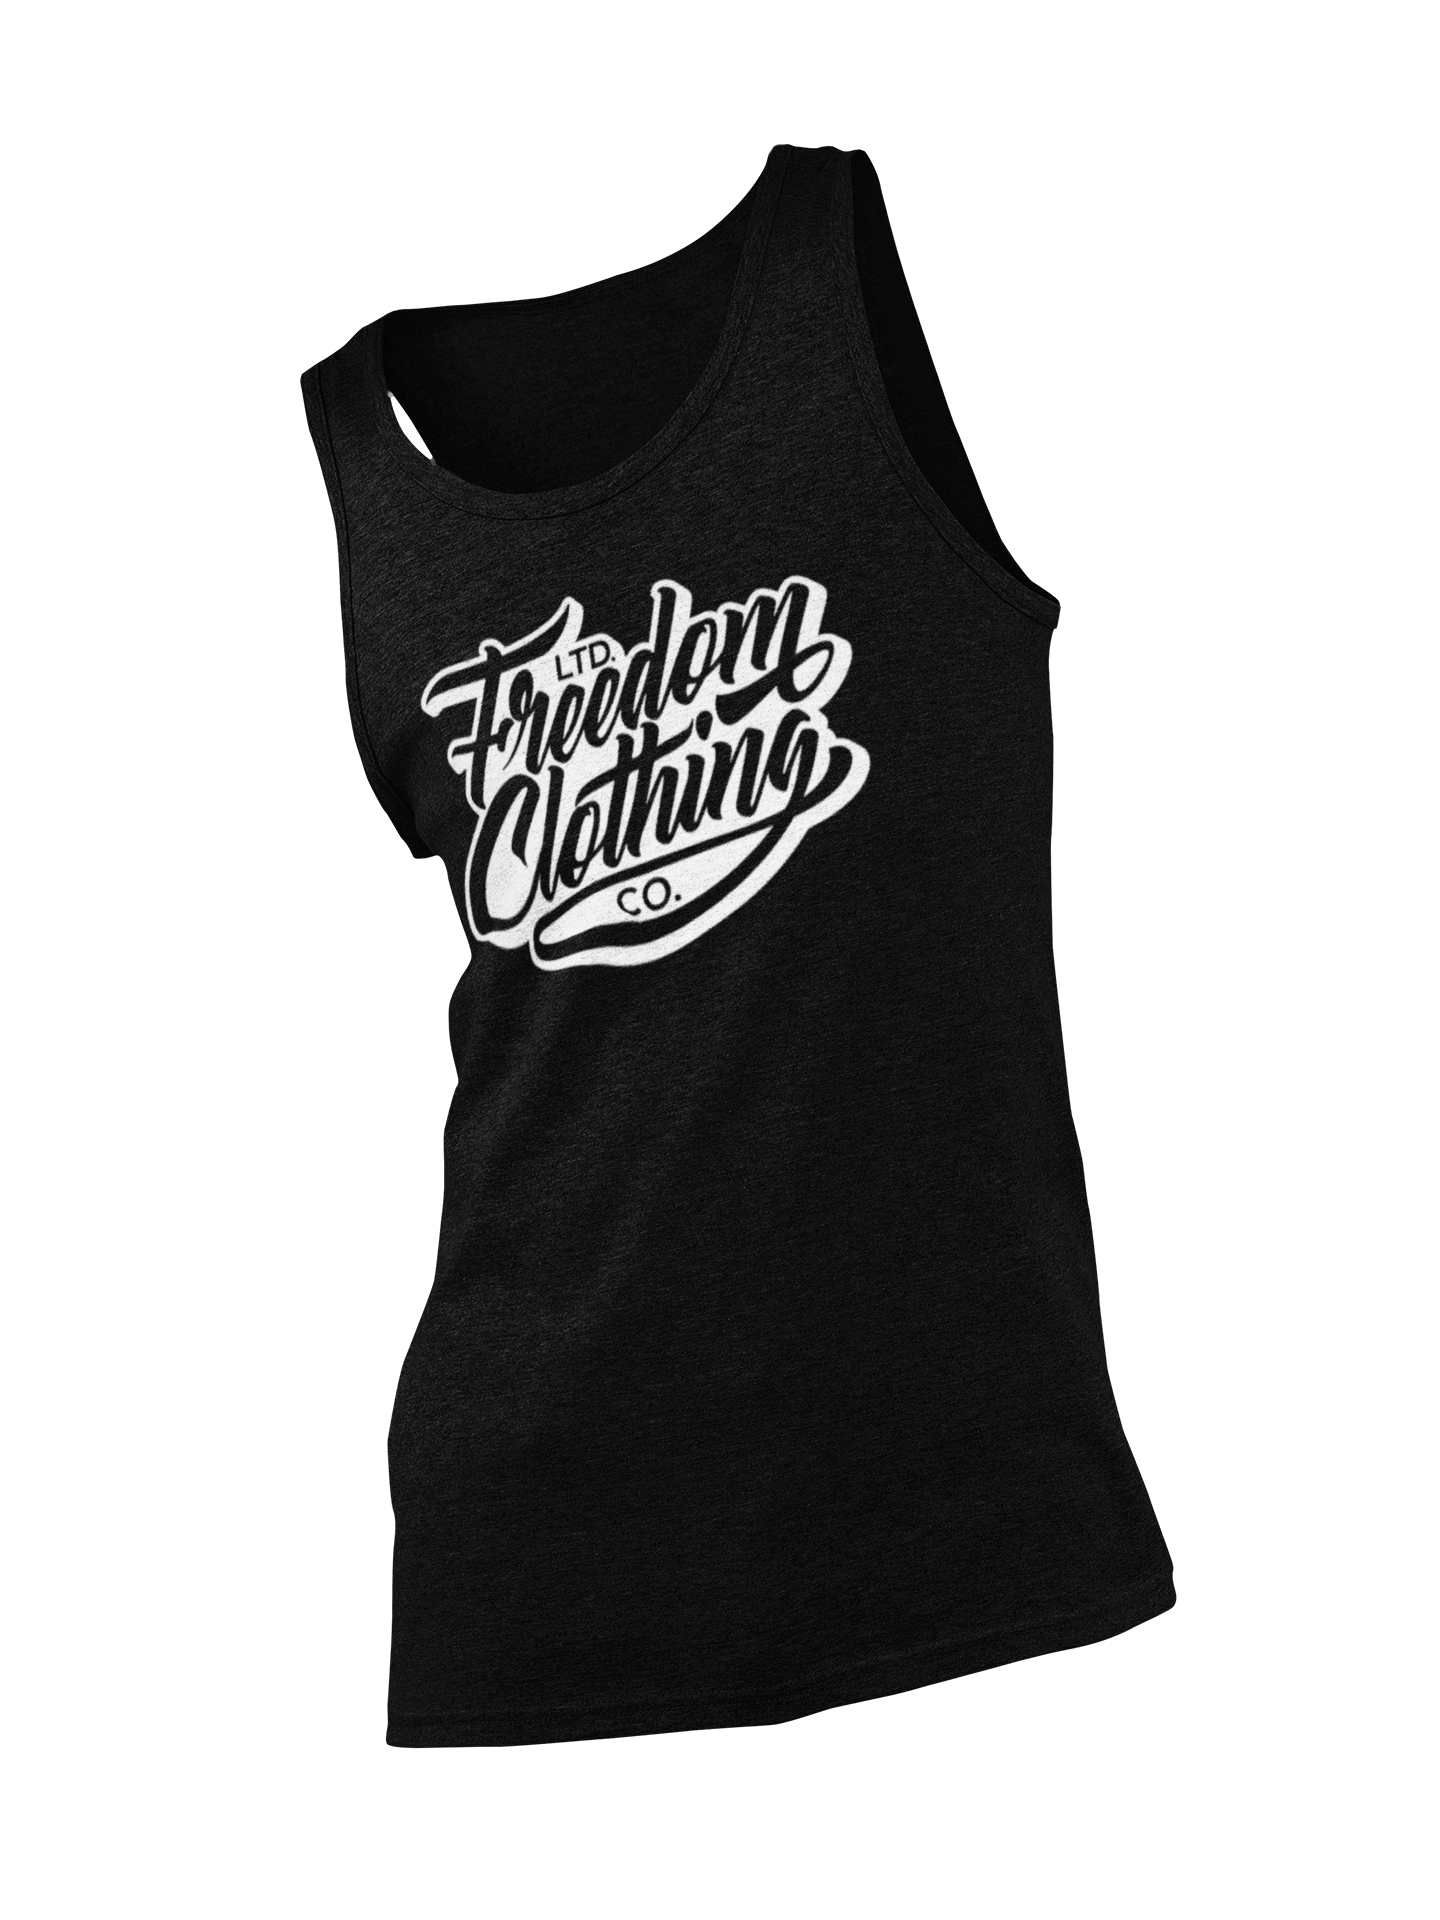 Limited Freedom Clothing Co. Tank Top